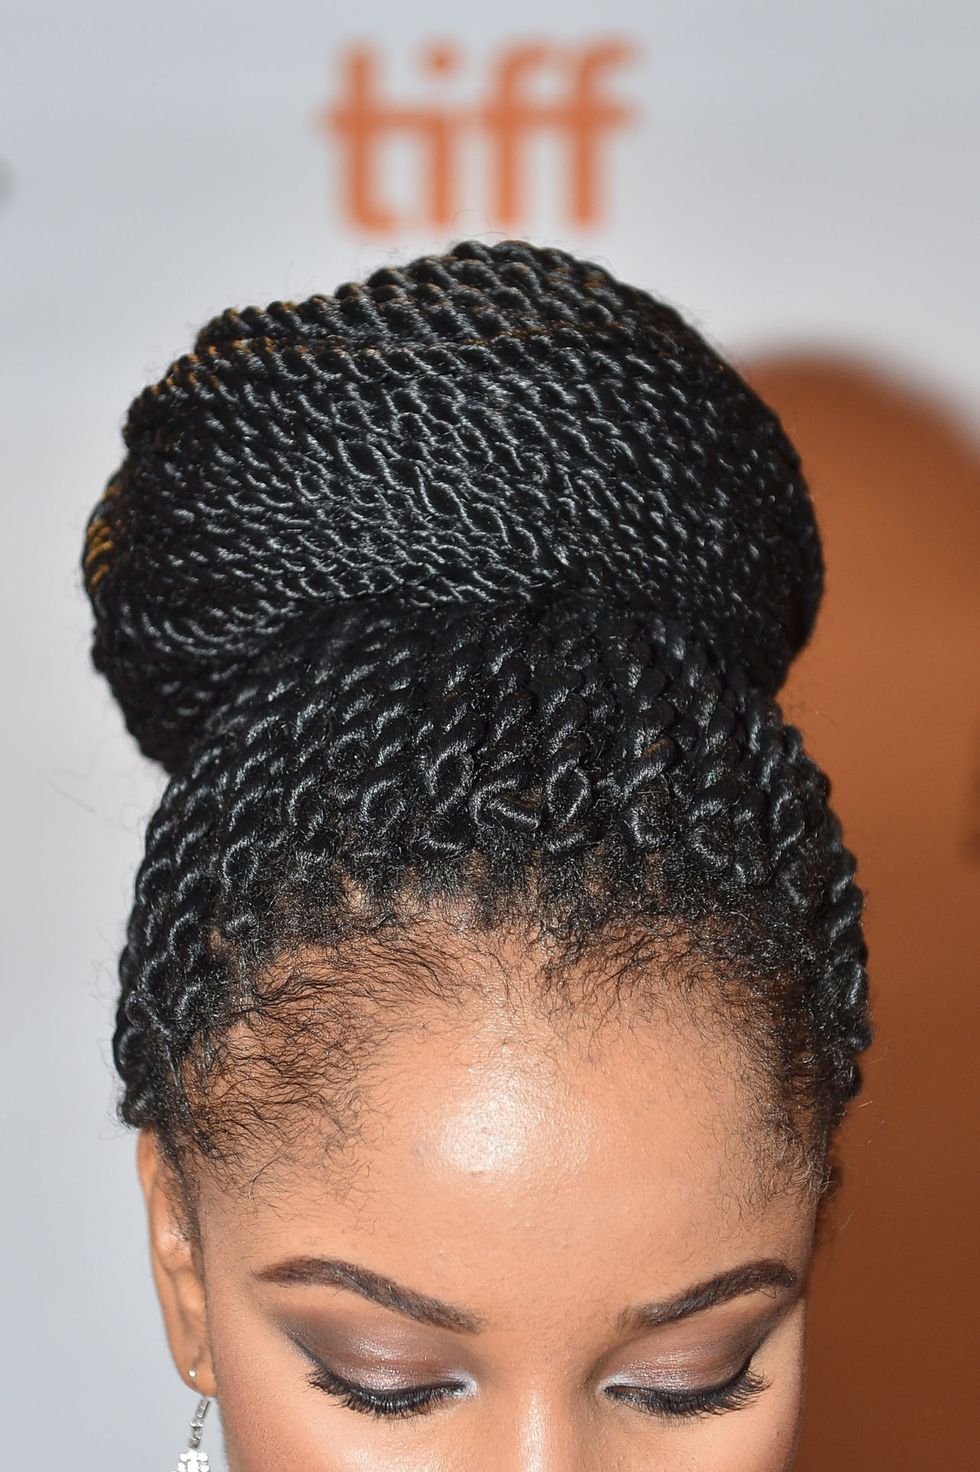 <p><span>Senegalese twists, Marley twists, Havana twists—Where do you even start? For starters, the names given to the variety of twists are often used to describe the type of hair used, size of the twists or technique. "When I am consulting with clients, I typically use the simple term 'twists' and get details from my client on the exact look they are going for so I can determine the type of hair to use, size and length," explains Dr. Kari. "One twist is</span><em data-redactor-tag="em"> not </em><span>better than the other, it is all based on preference."&nbsp;</span></p>